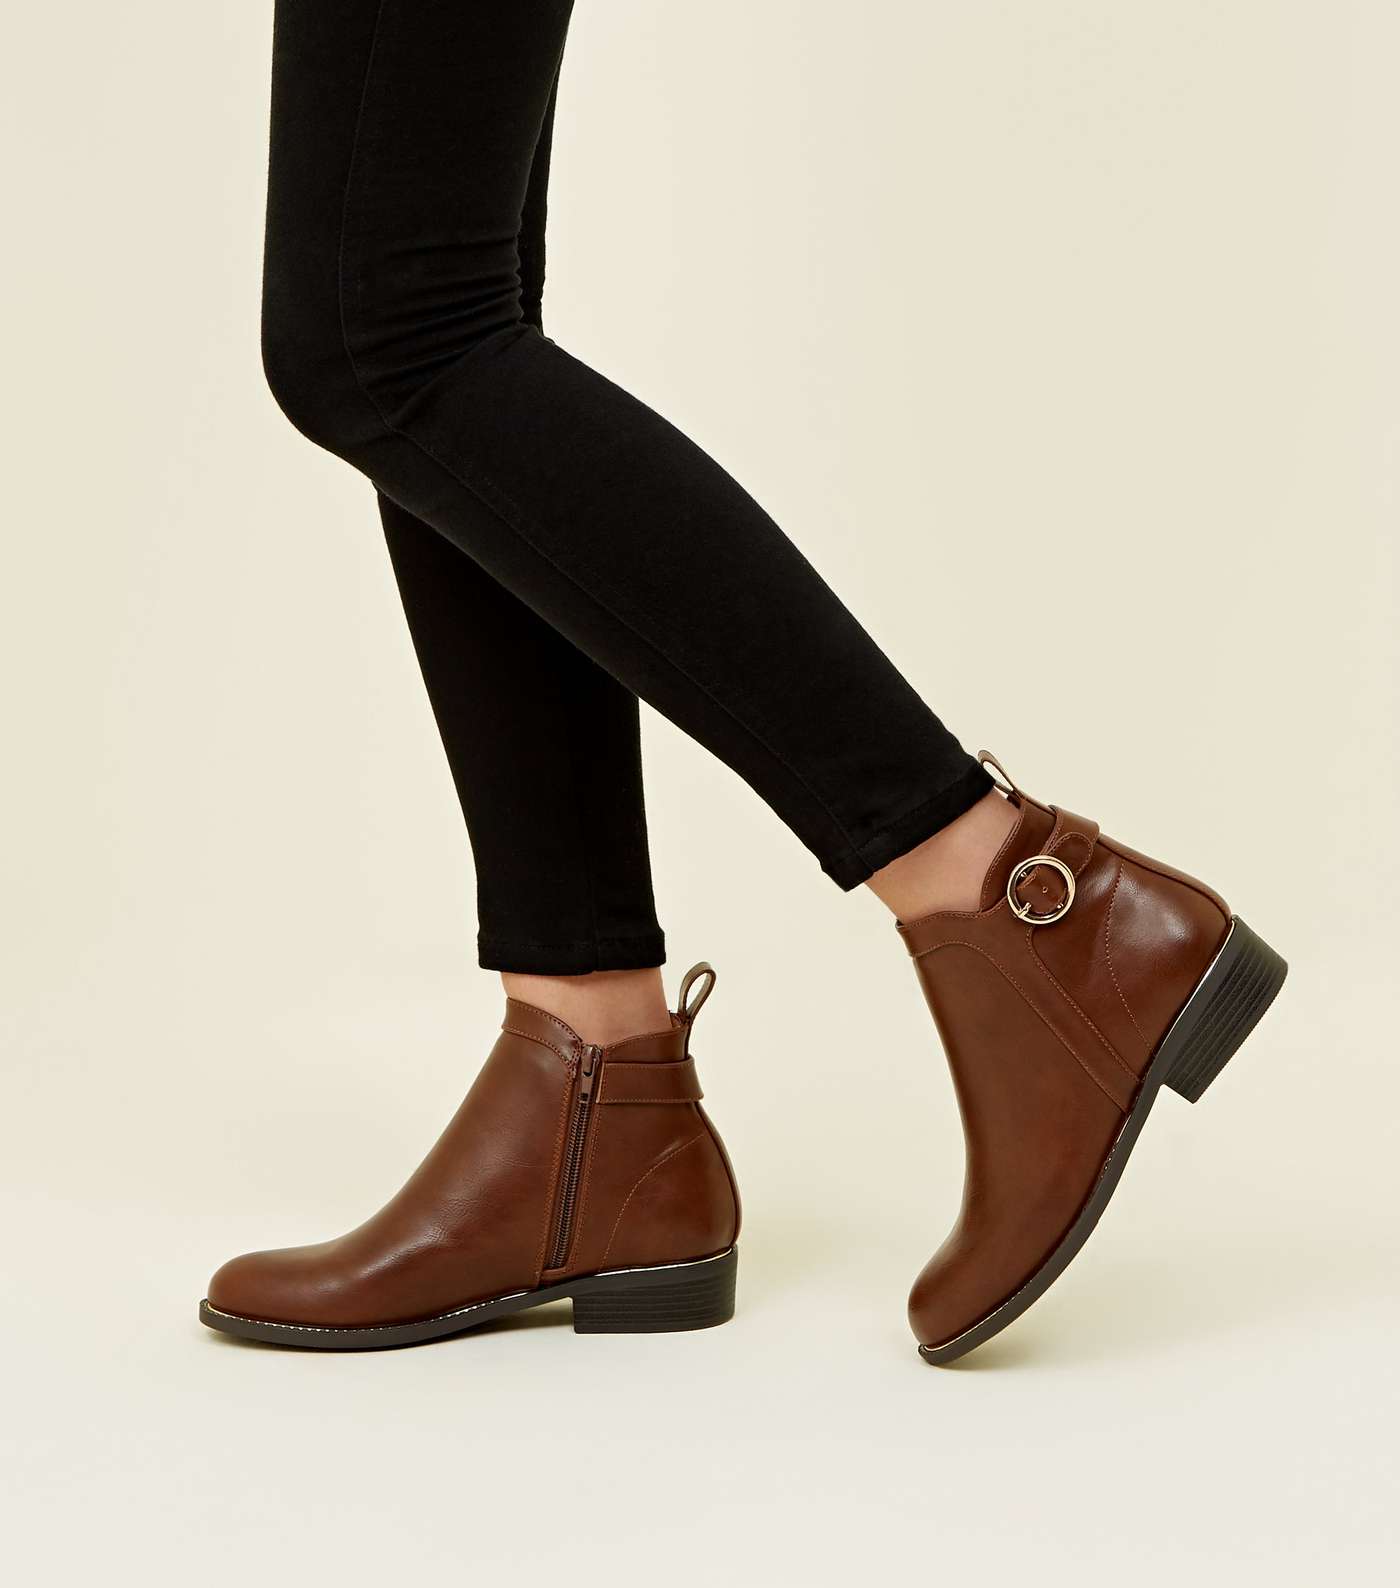 Girls Tan Leather-Look Ring Strap Ankle Boots Image 2